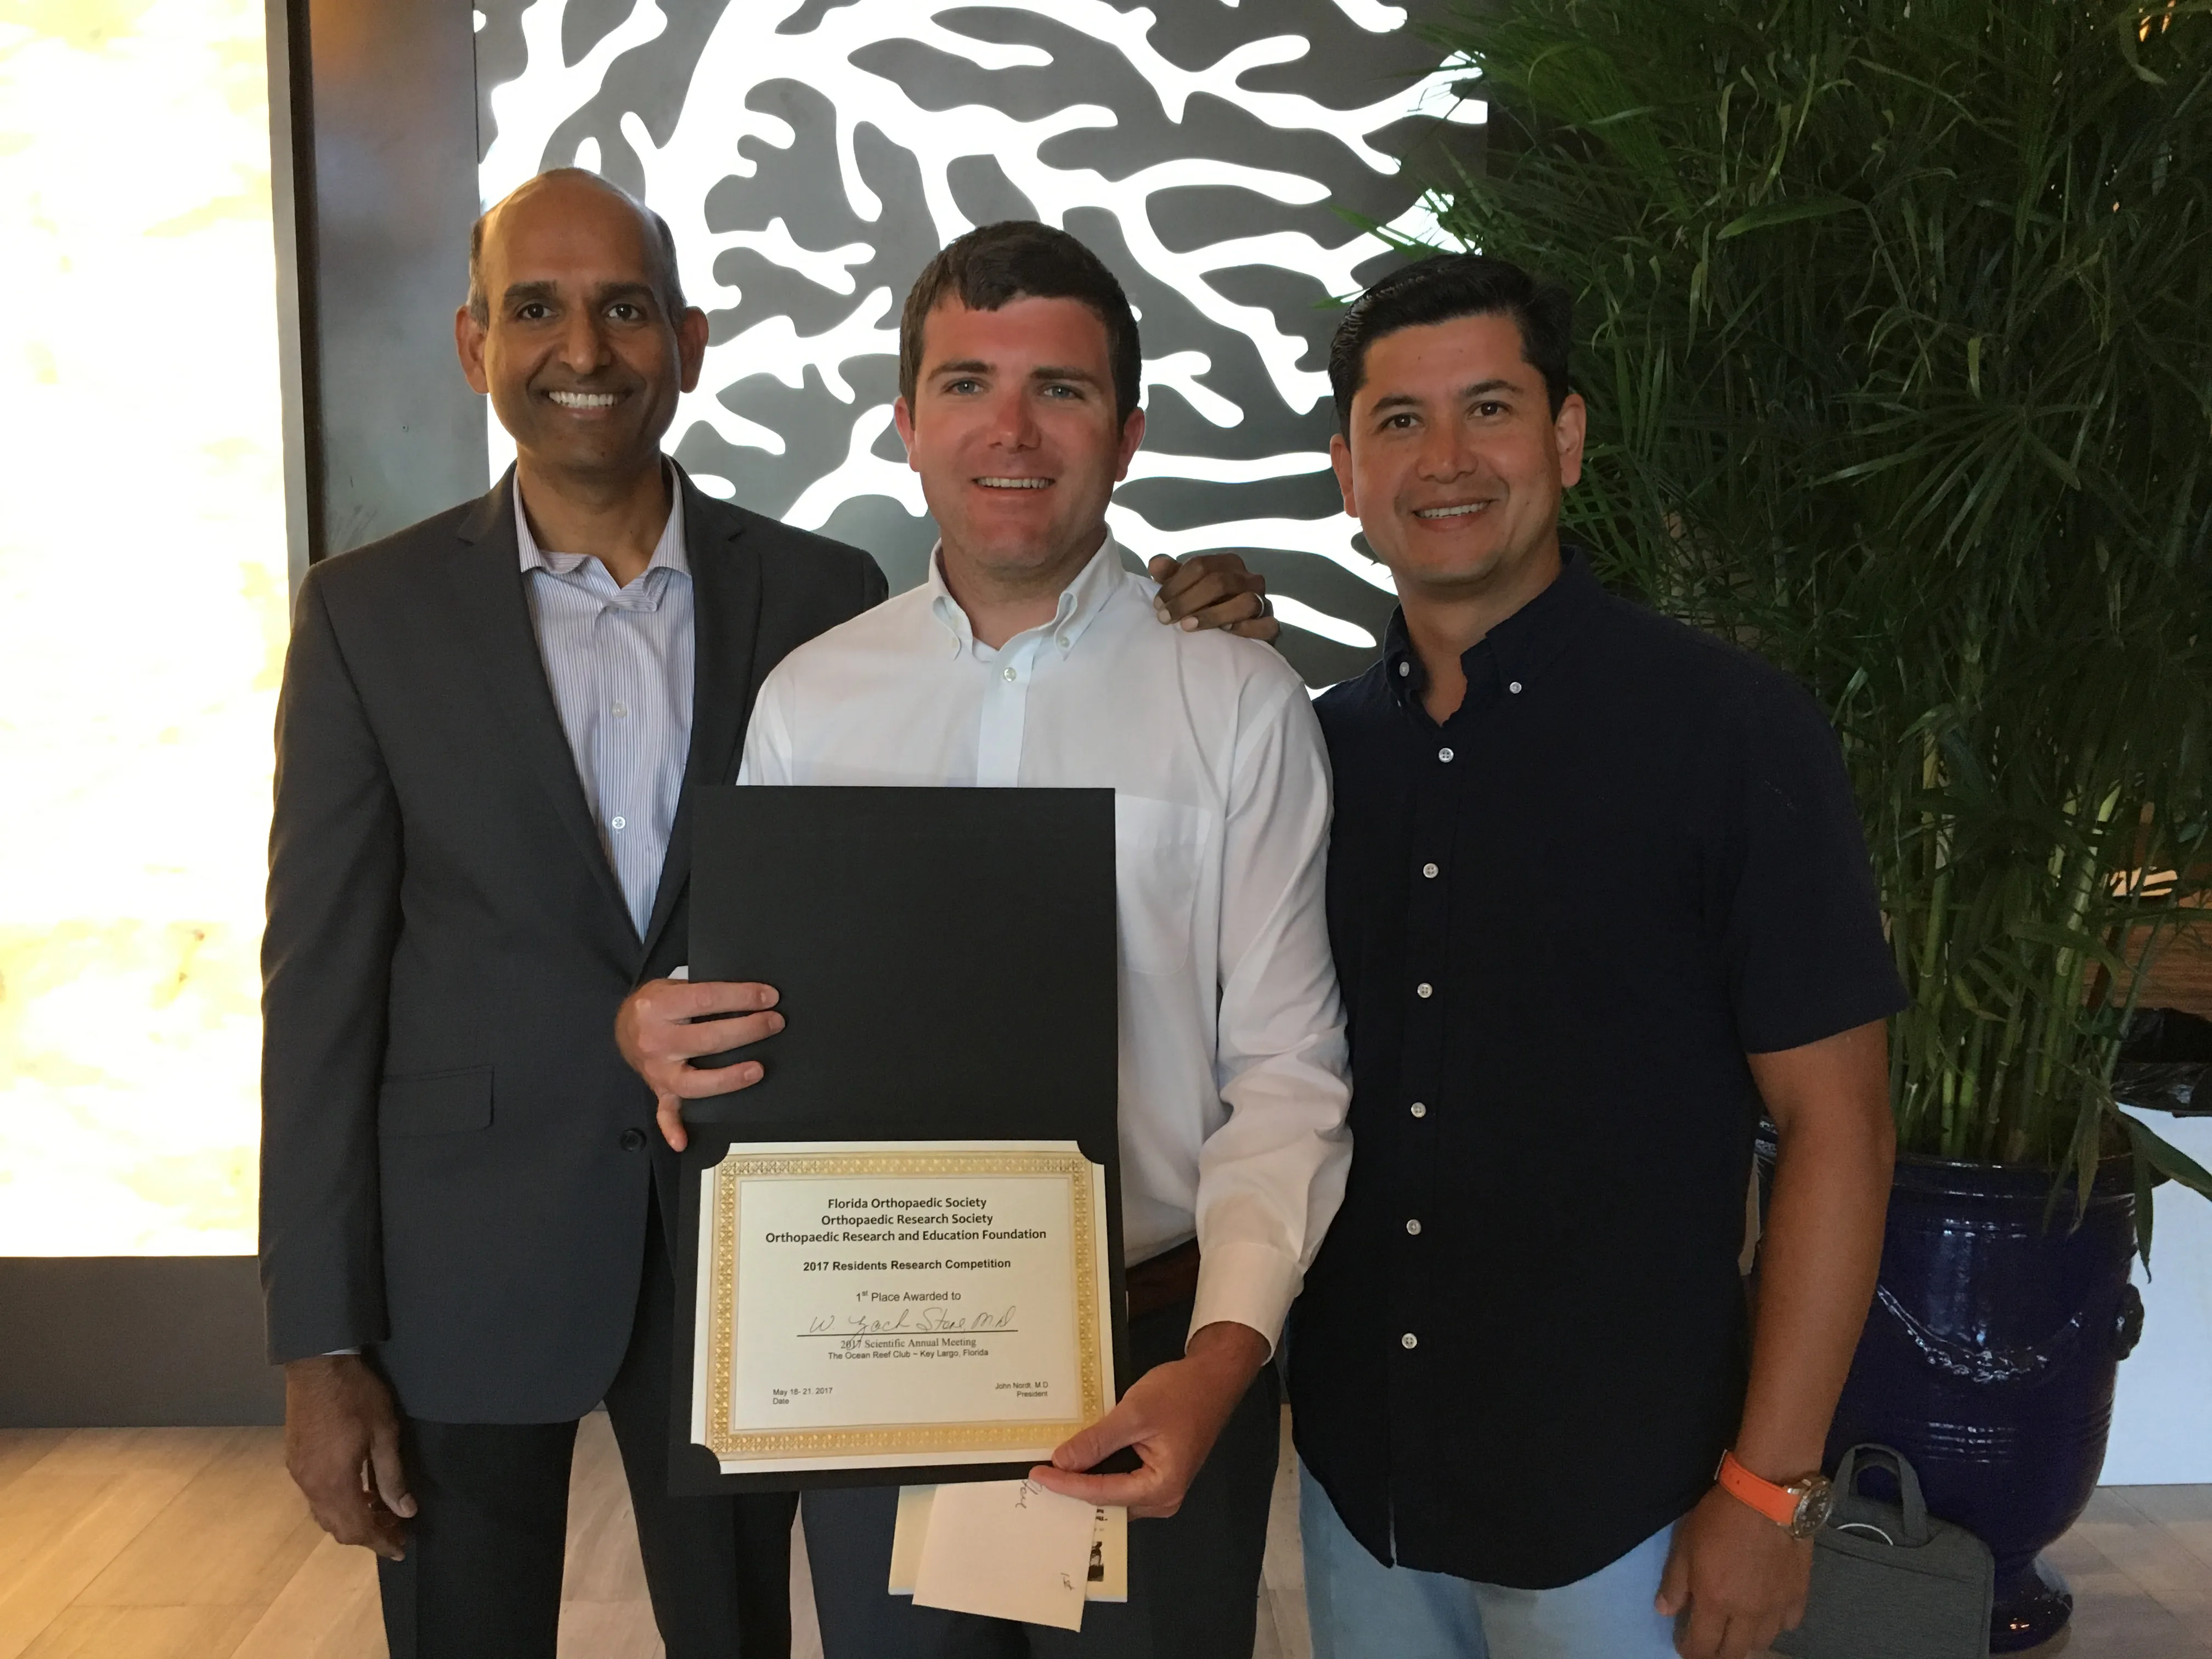 Zach Stone 1st Place Resident Research Award at 2017 FOS Annual Meeting (picture with Dr. Parvataneni and Dr. Prieto)